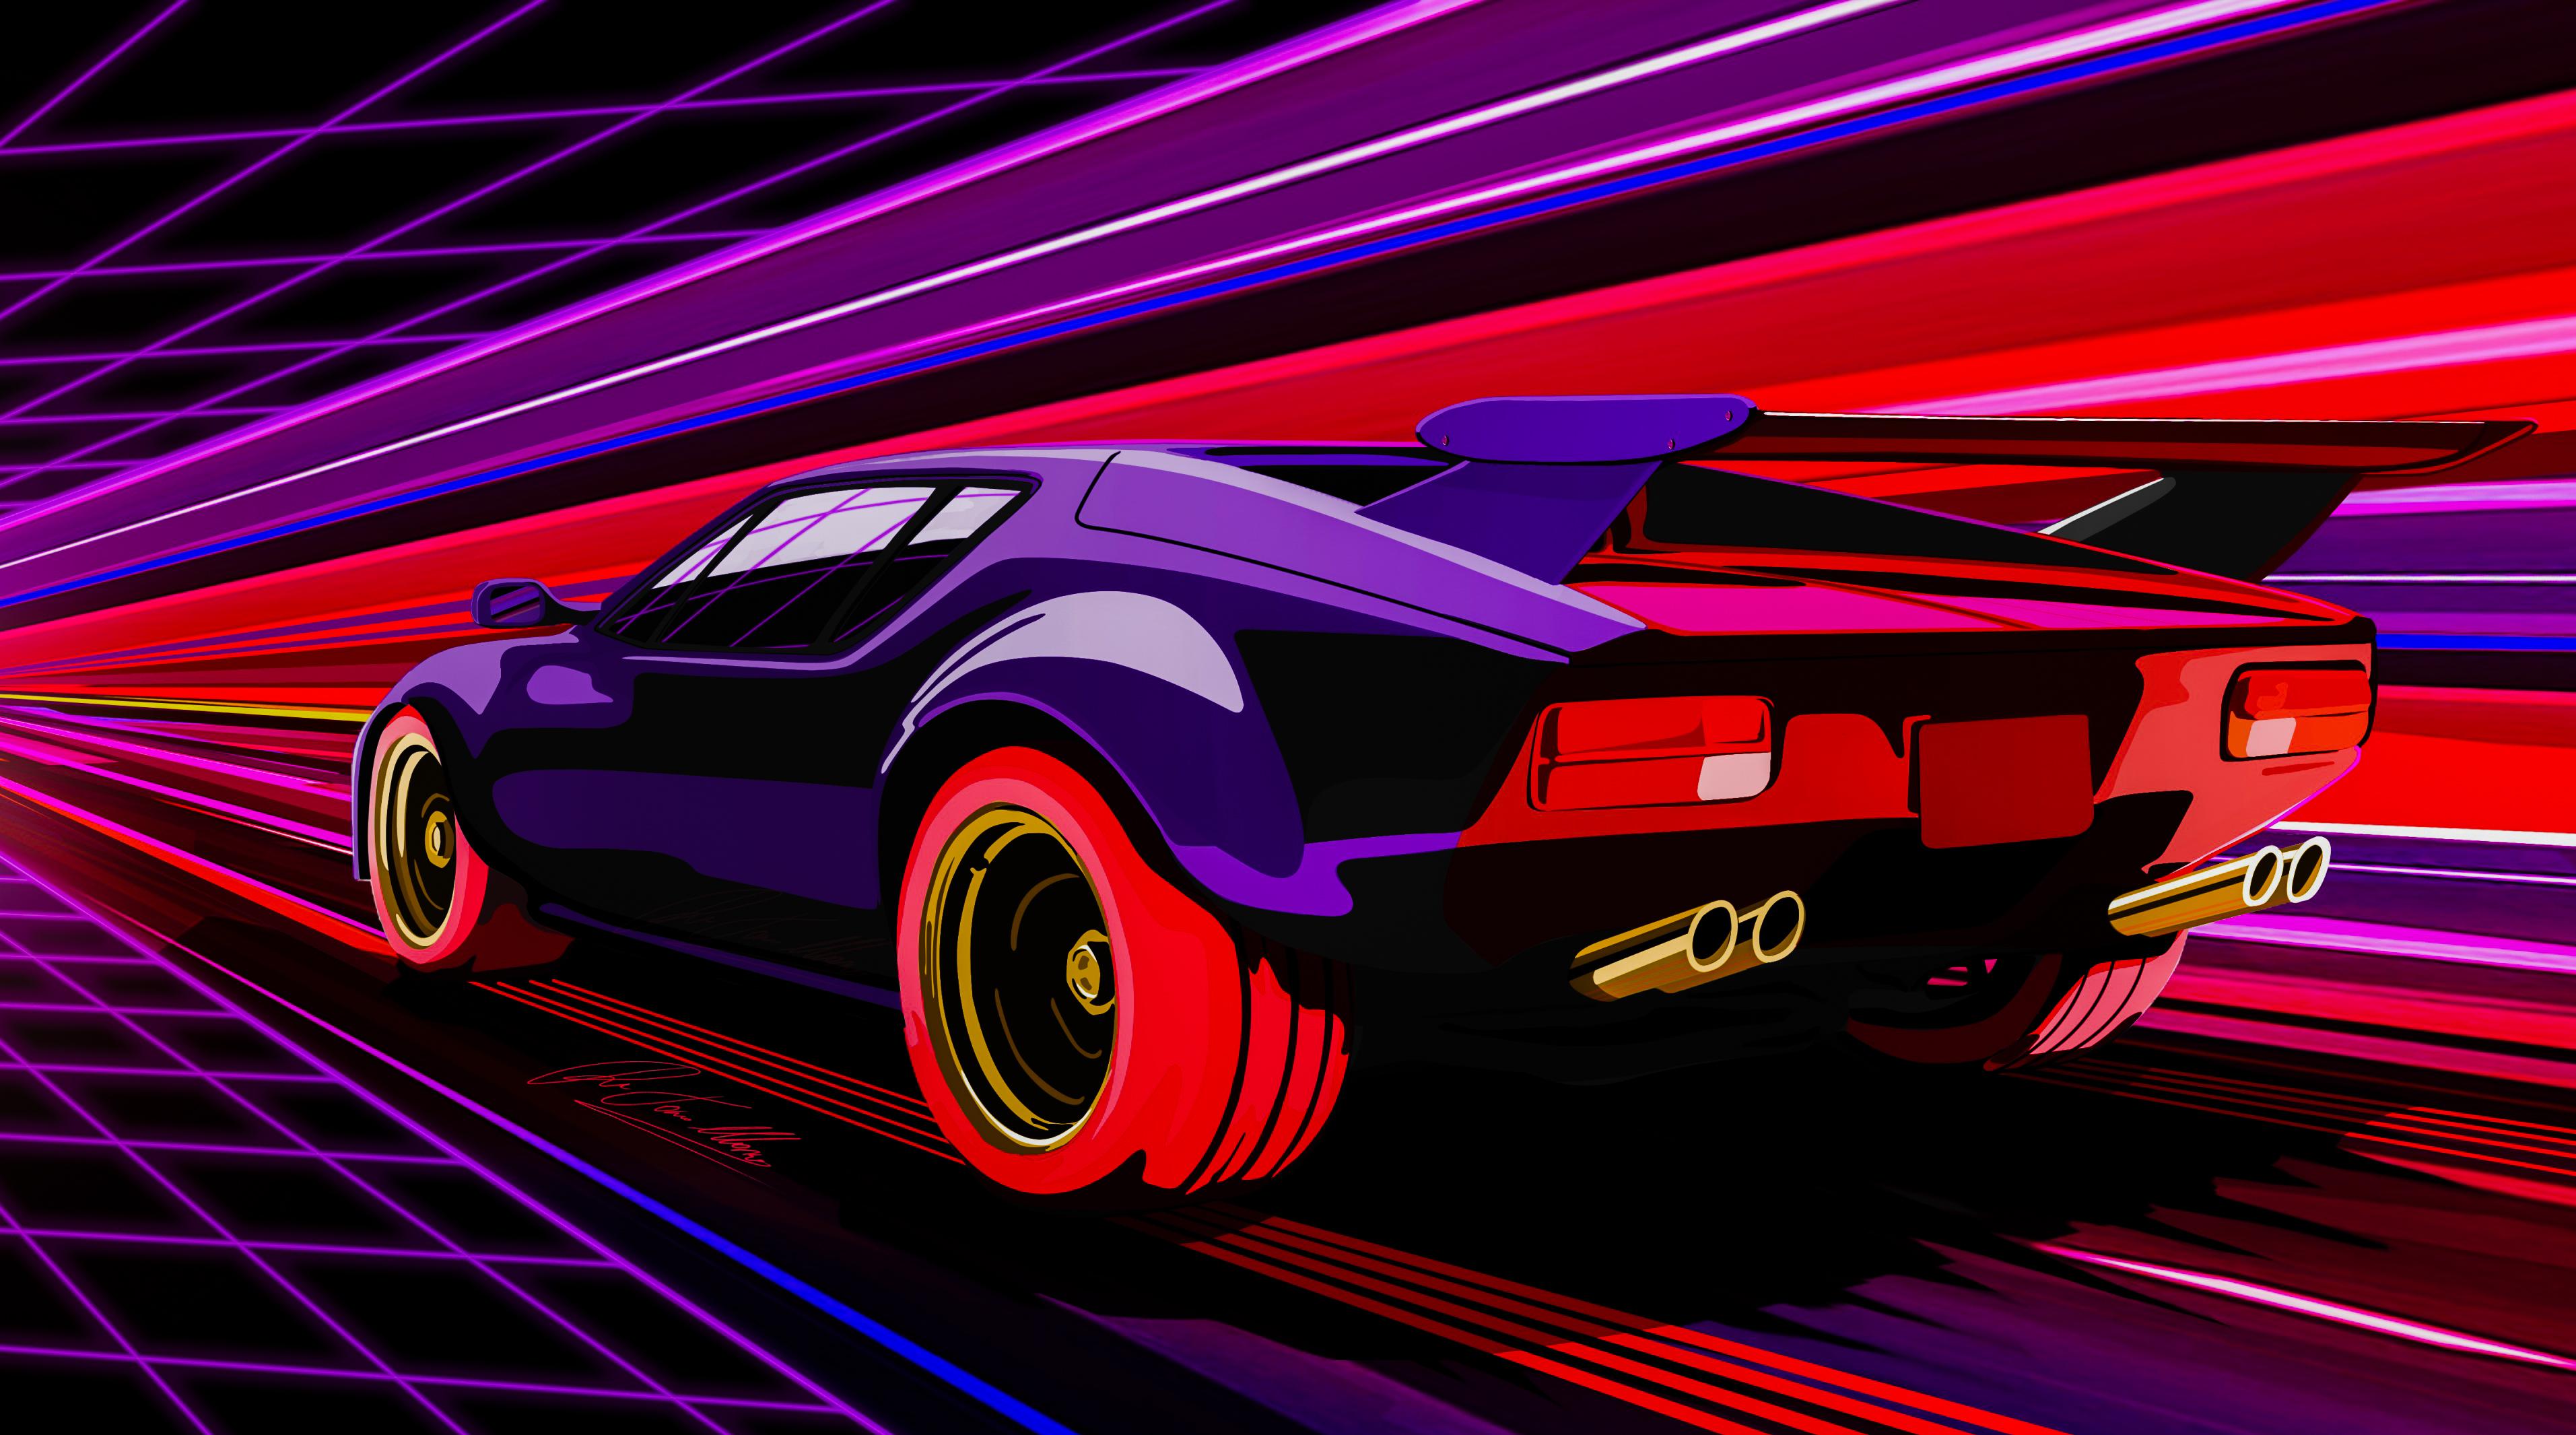 Fast 4K wallpaper for your desktop or mobile screen free and easy to download